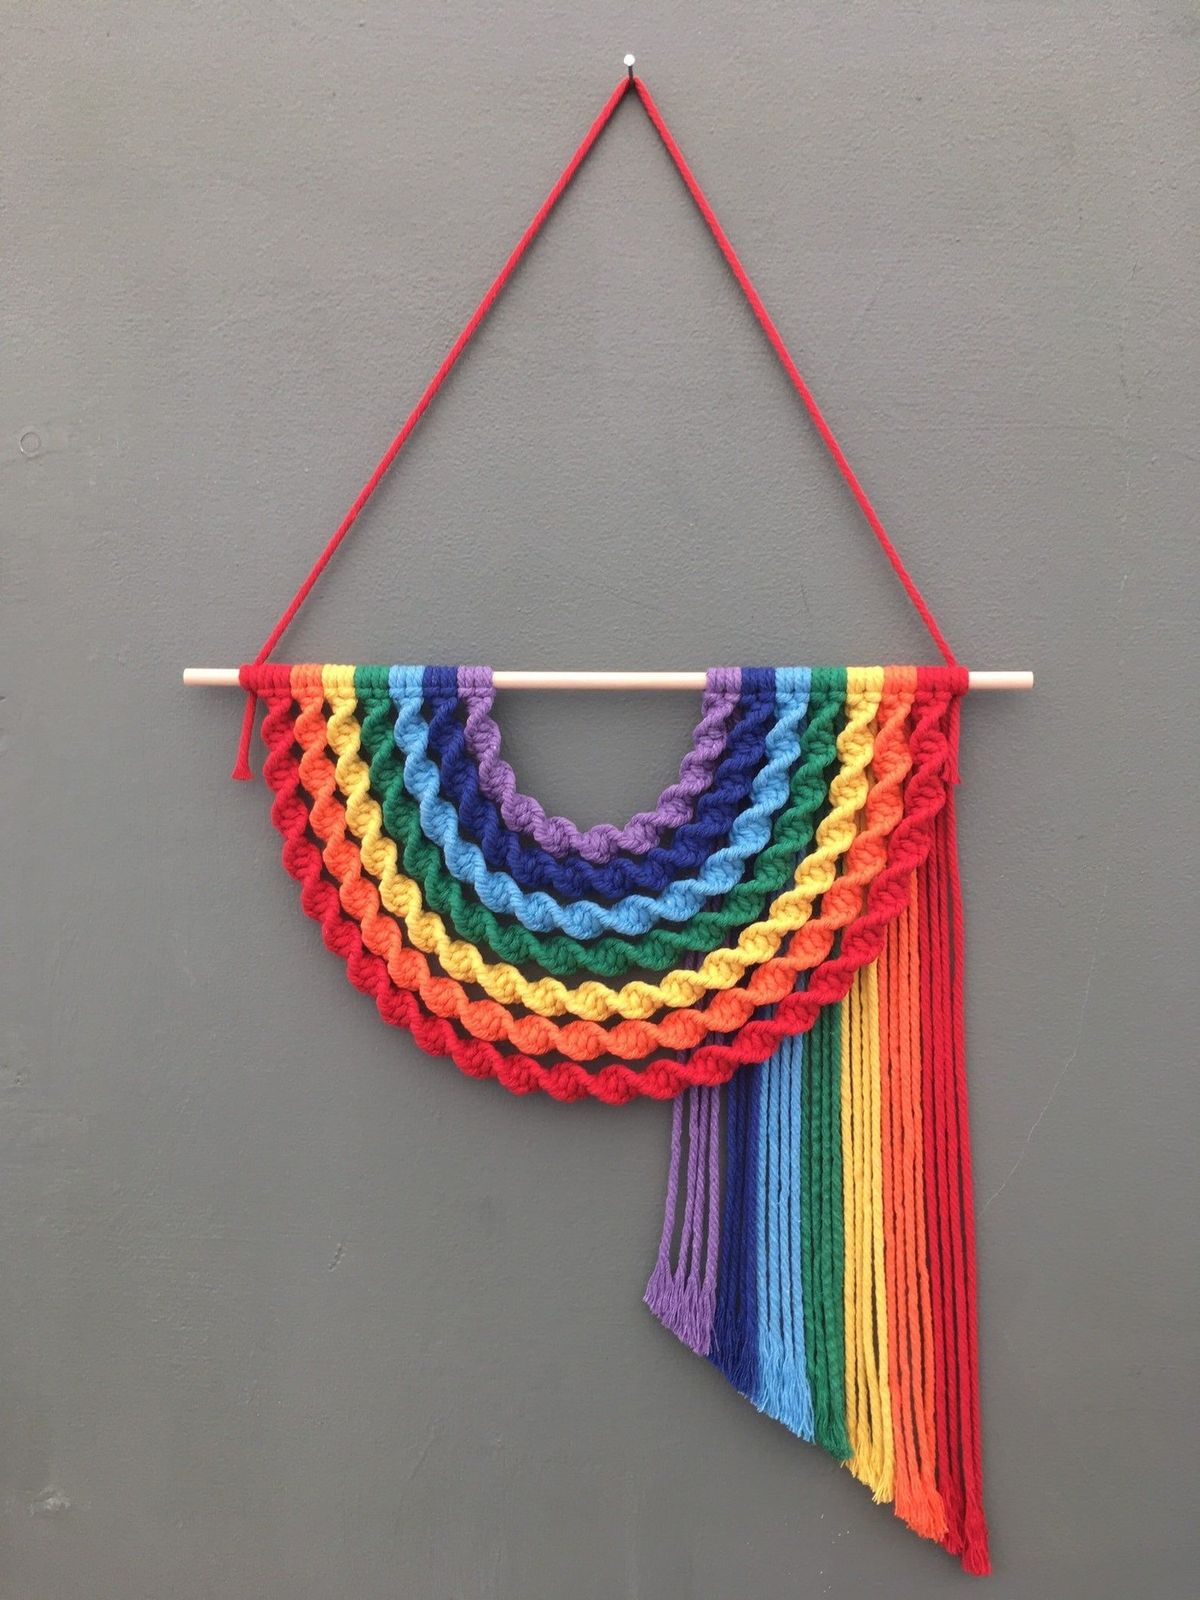 Rainbow macrame wall hanging class at Stonecloud